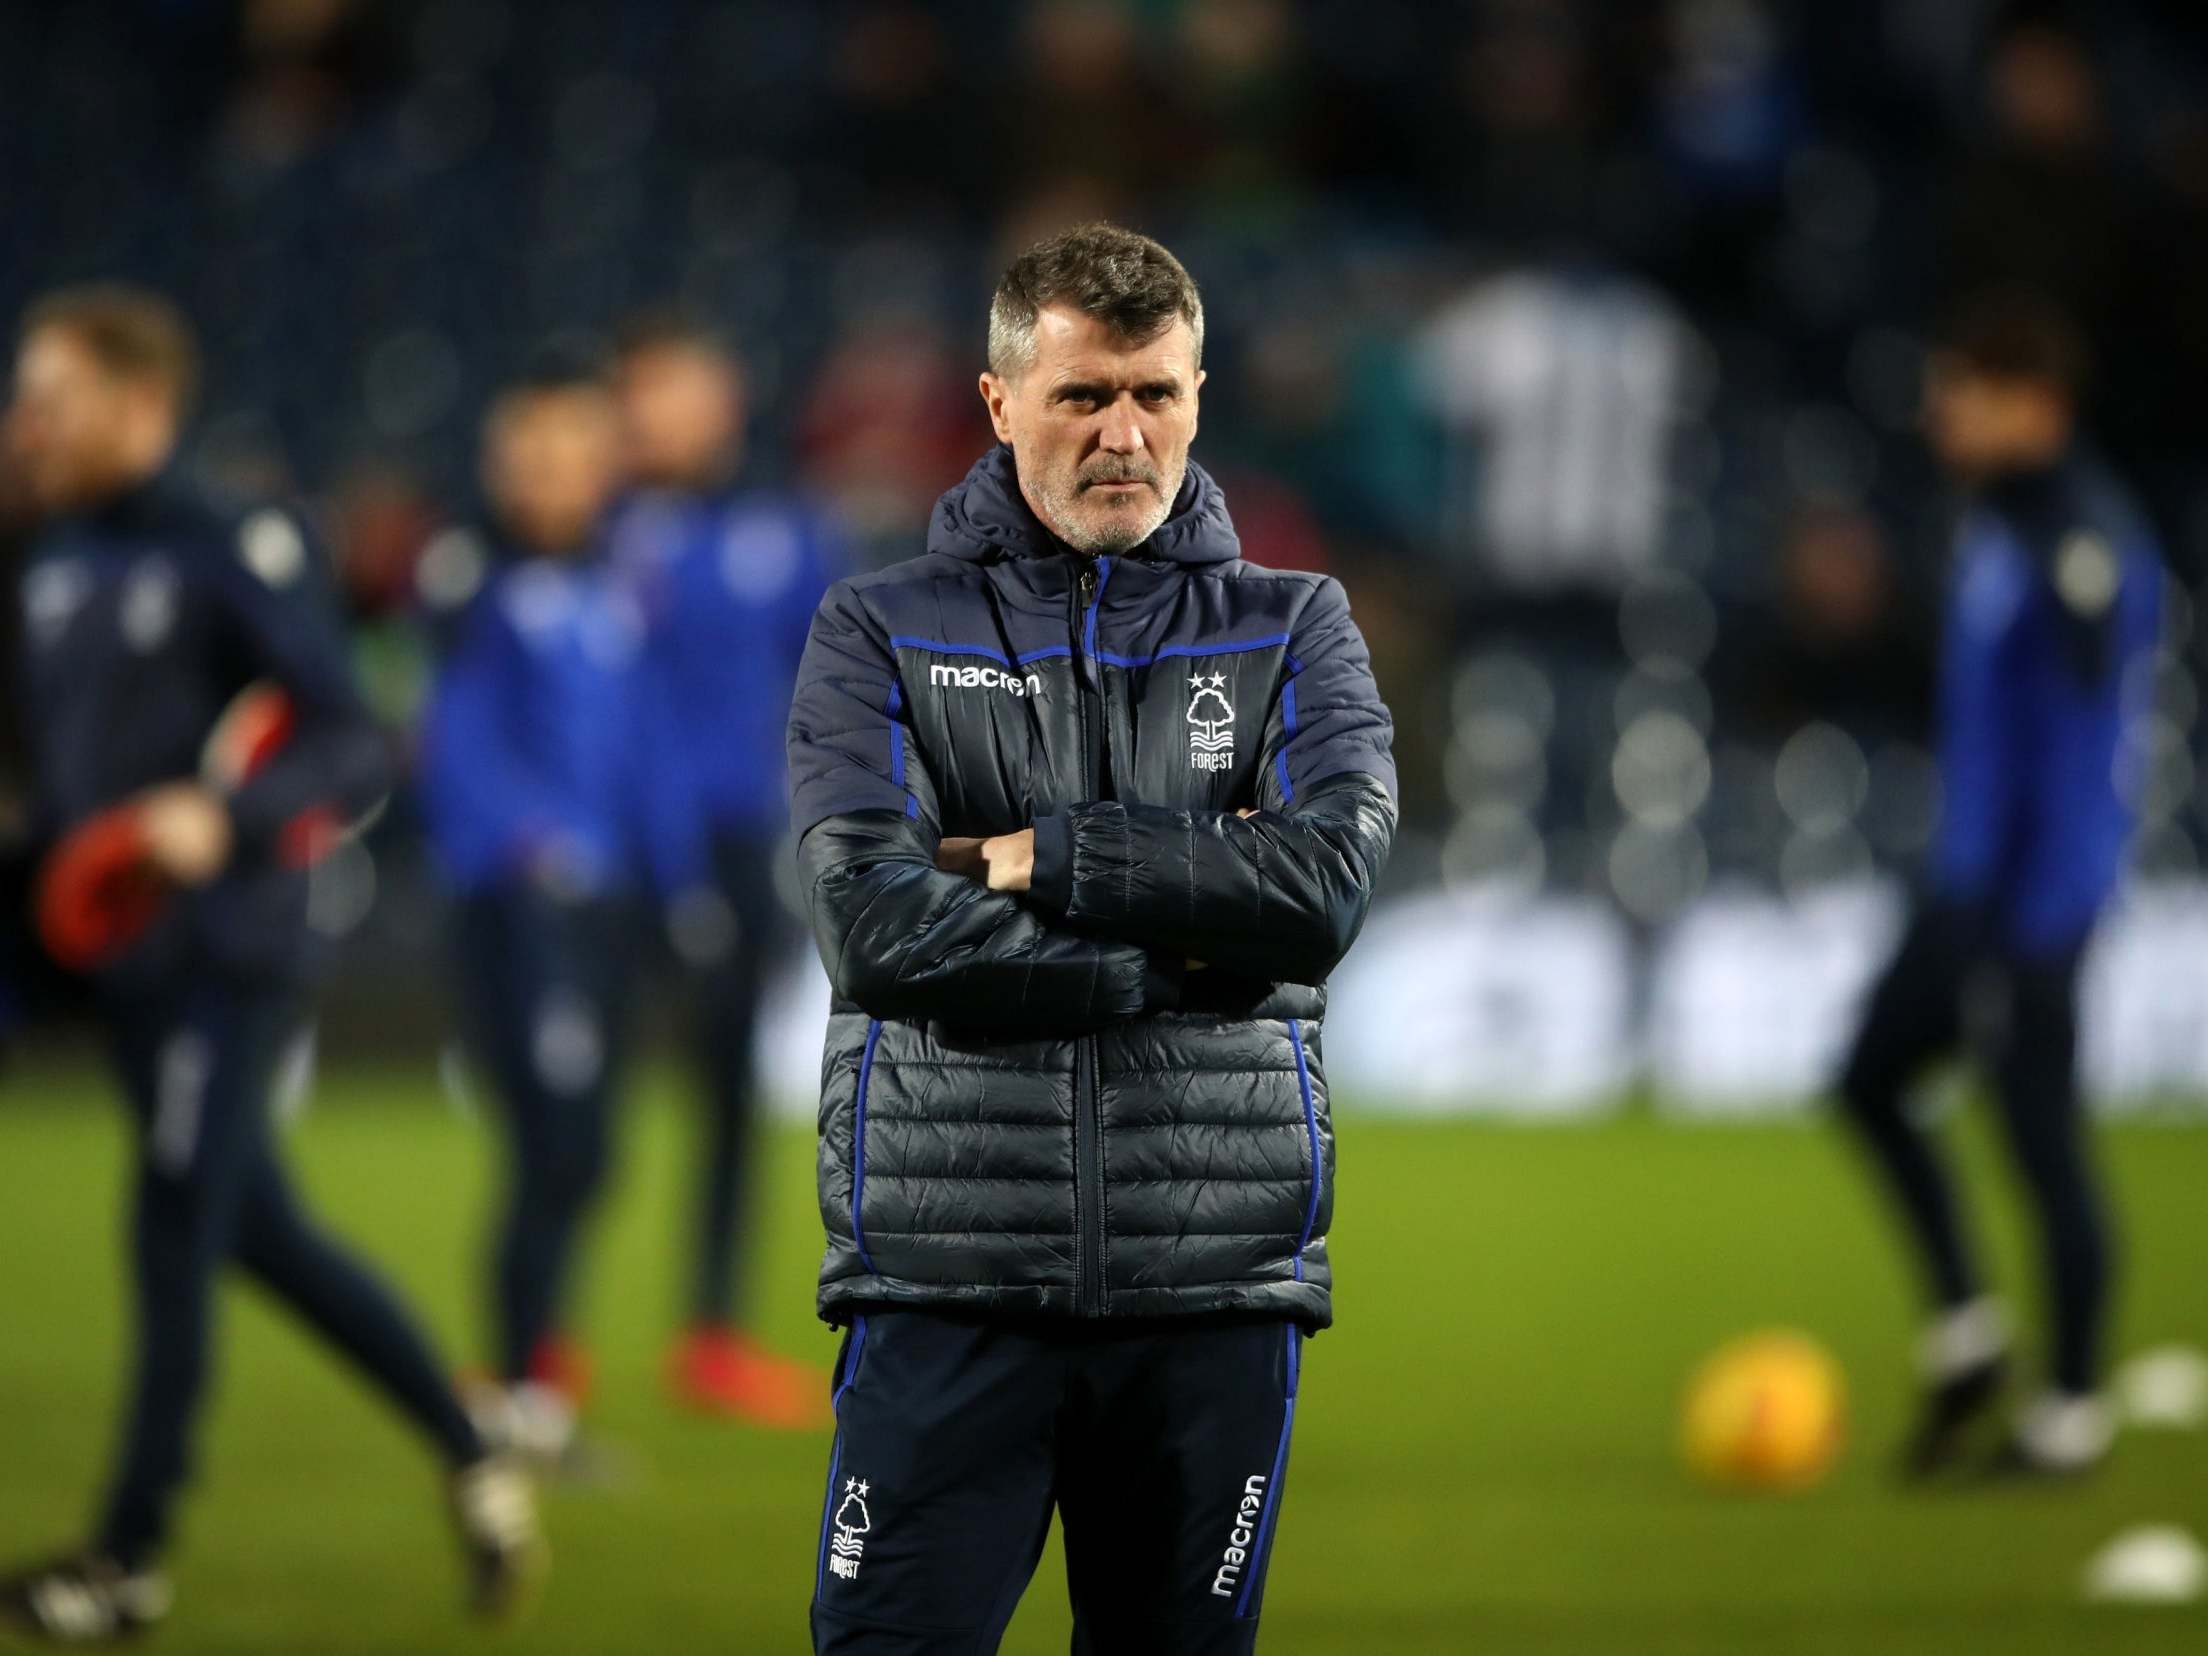 Roy Keane has left Nottingham Forest with immediate effect